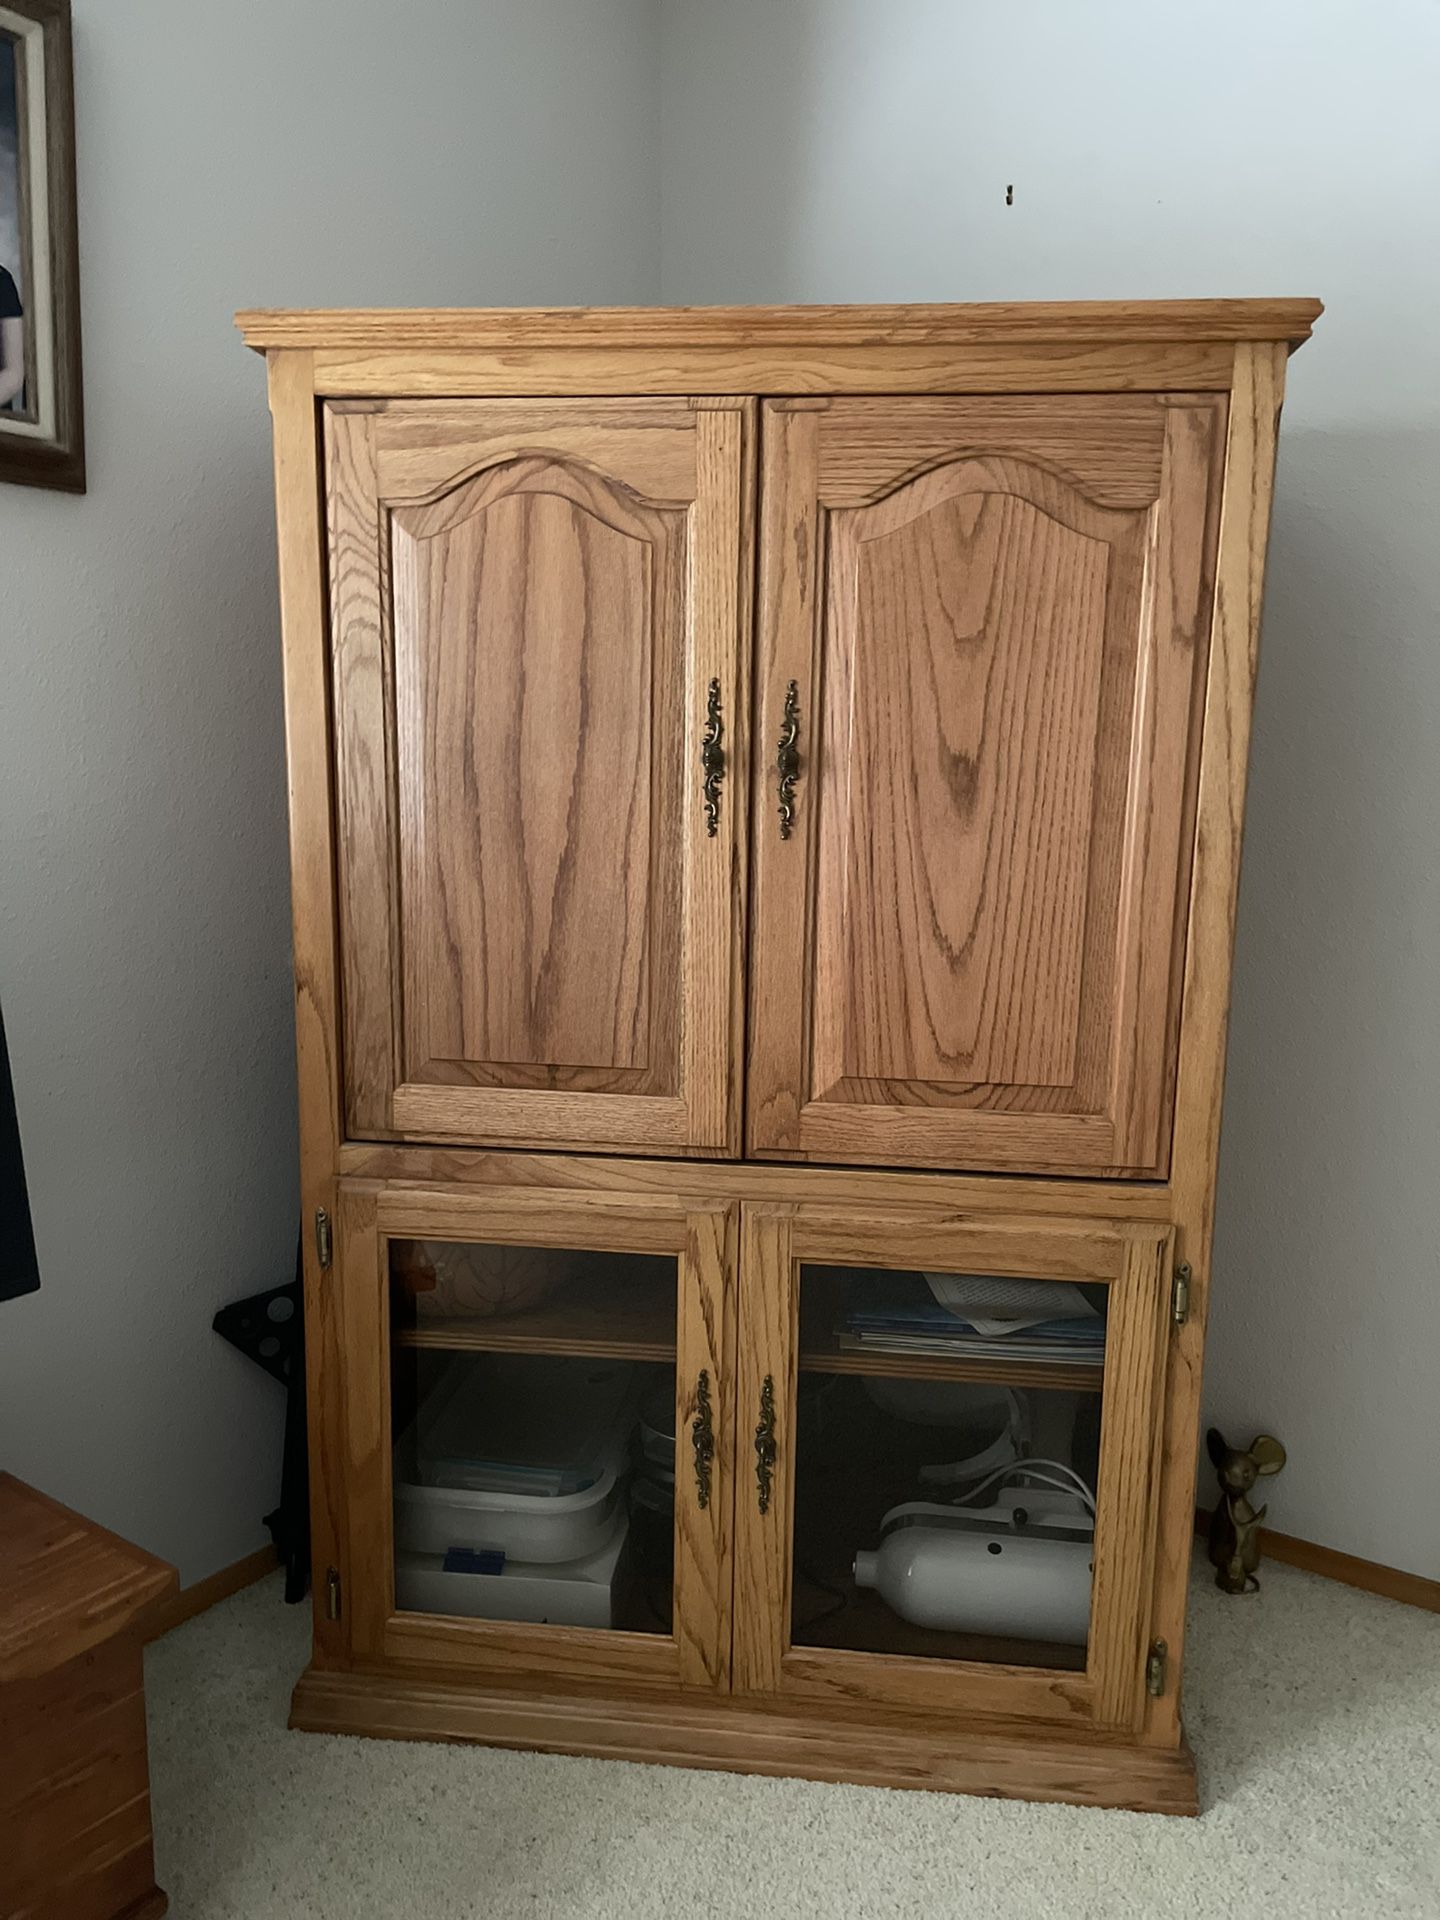 Wood Entertainment Center With Sliding Doors & Upper And Lower Openings For Electrical Cords